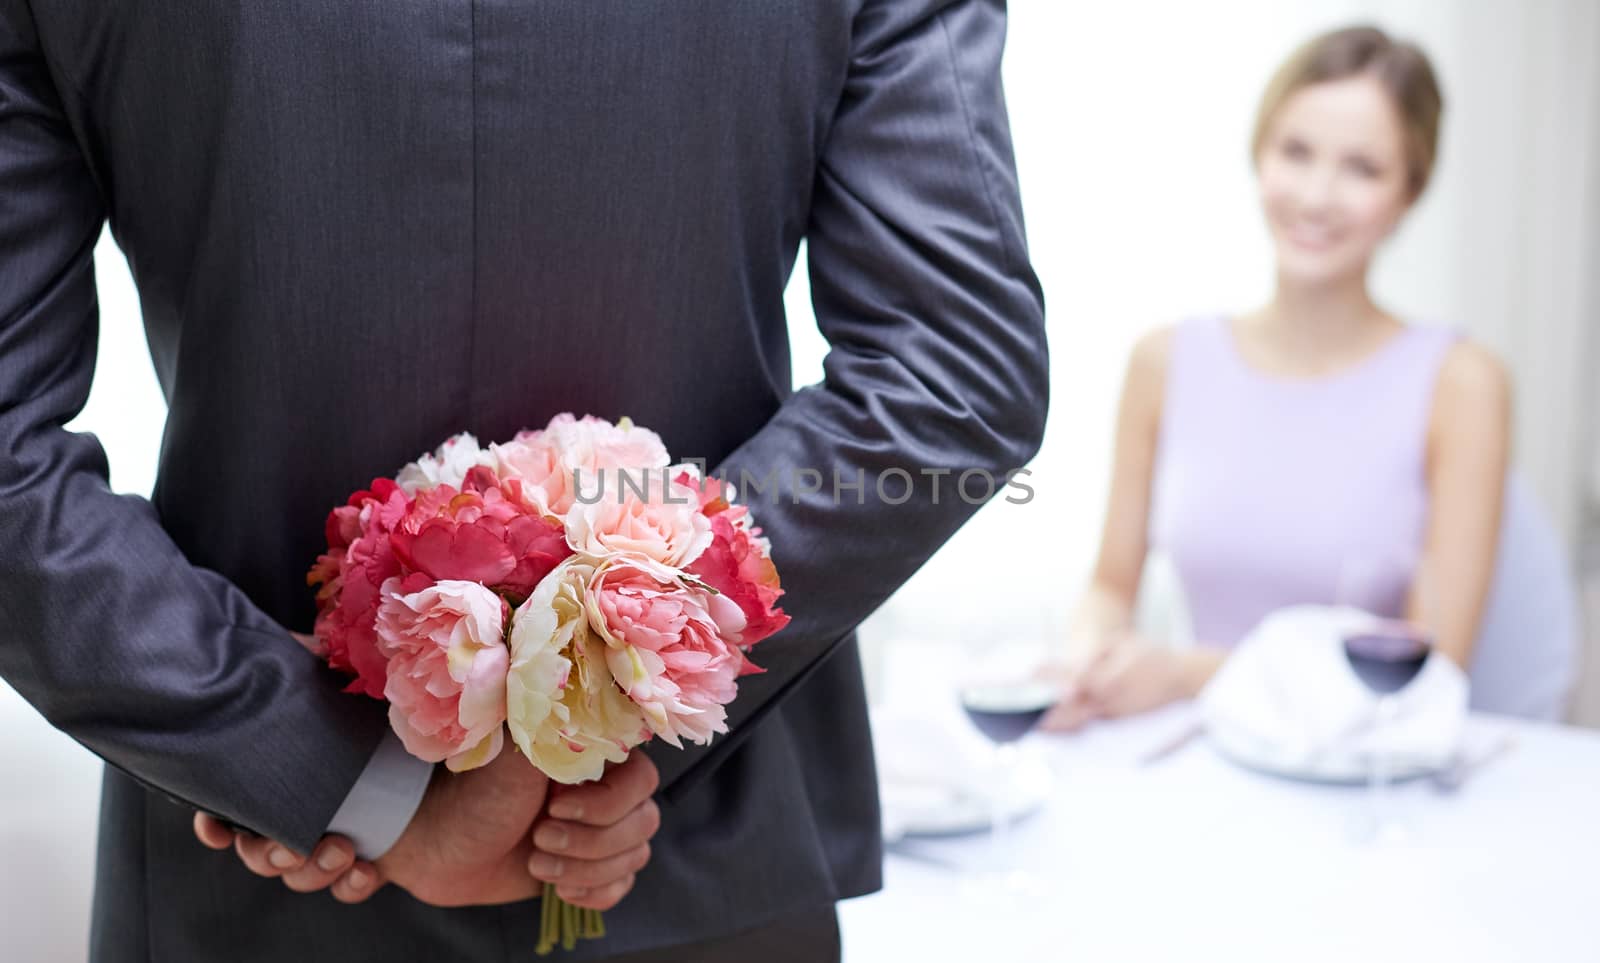 restaurant, people, celebration and holiday concept - close up of man hiding flowers behind from woman at restaurant